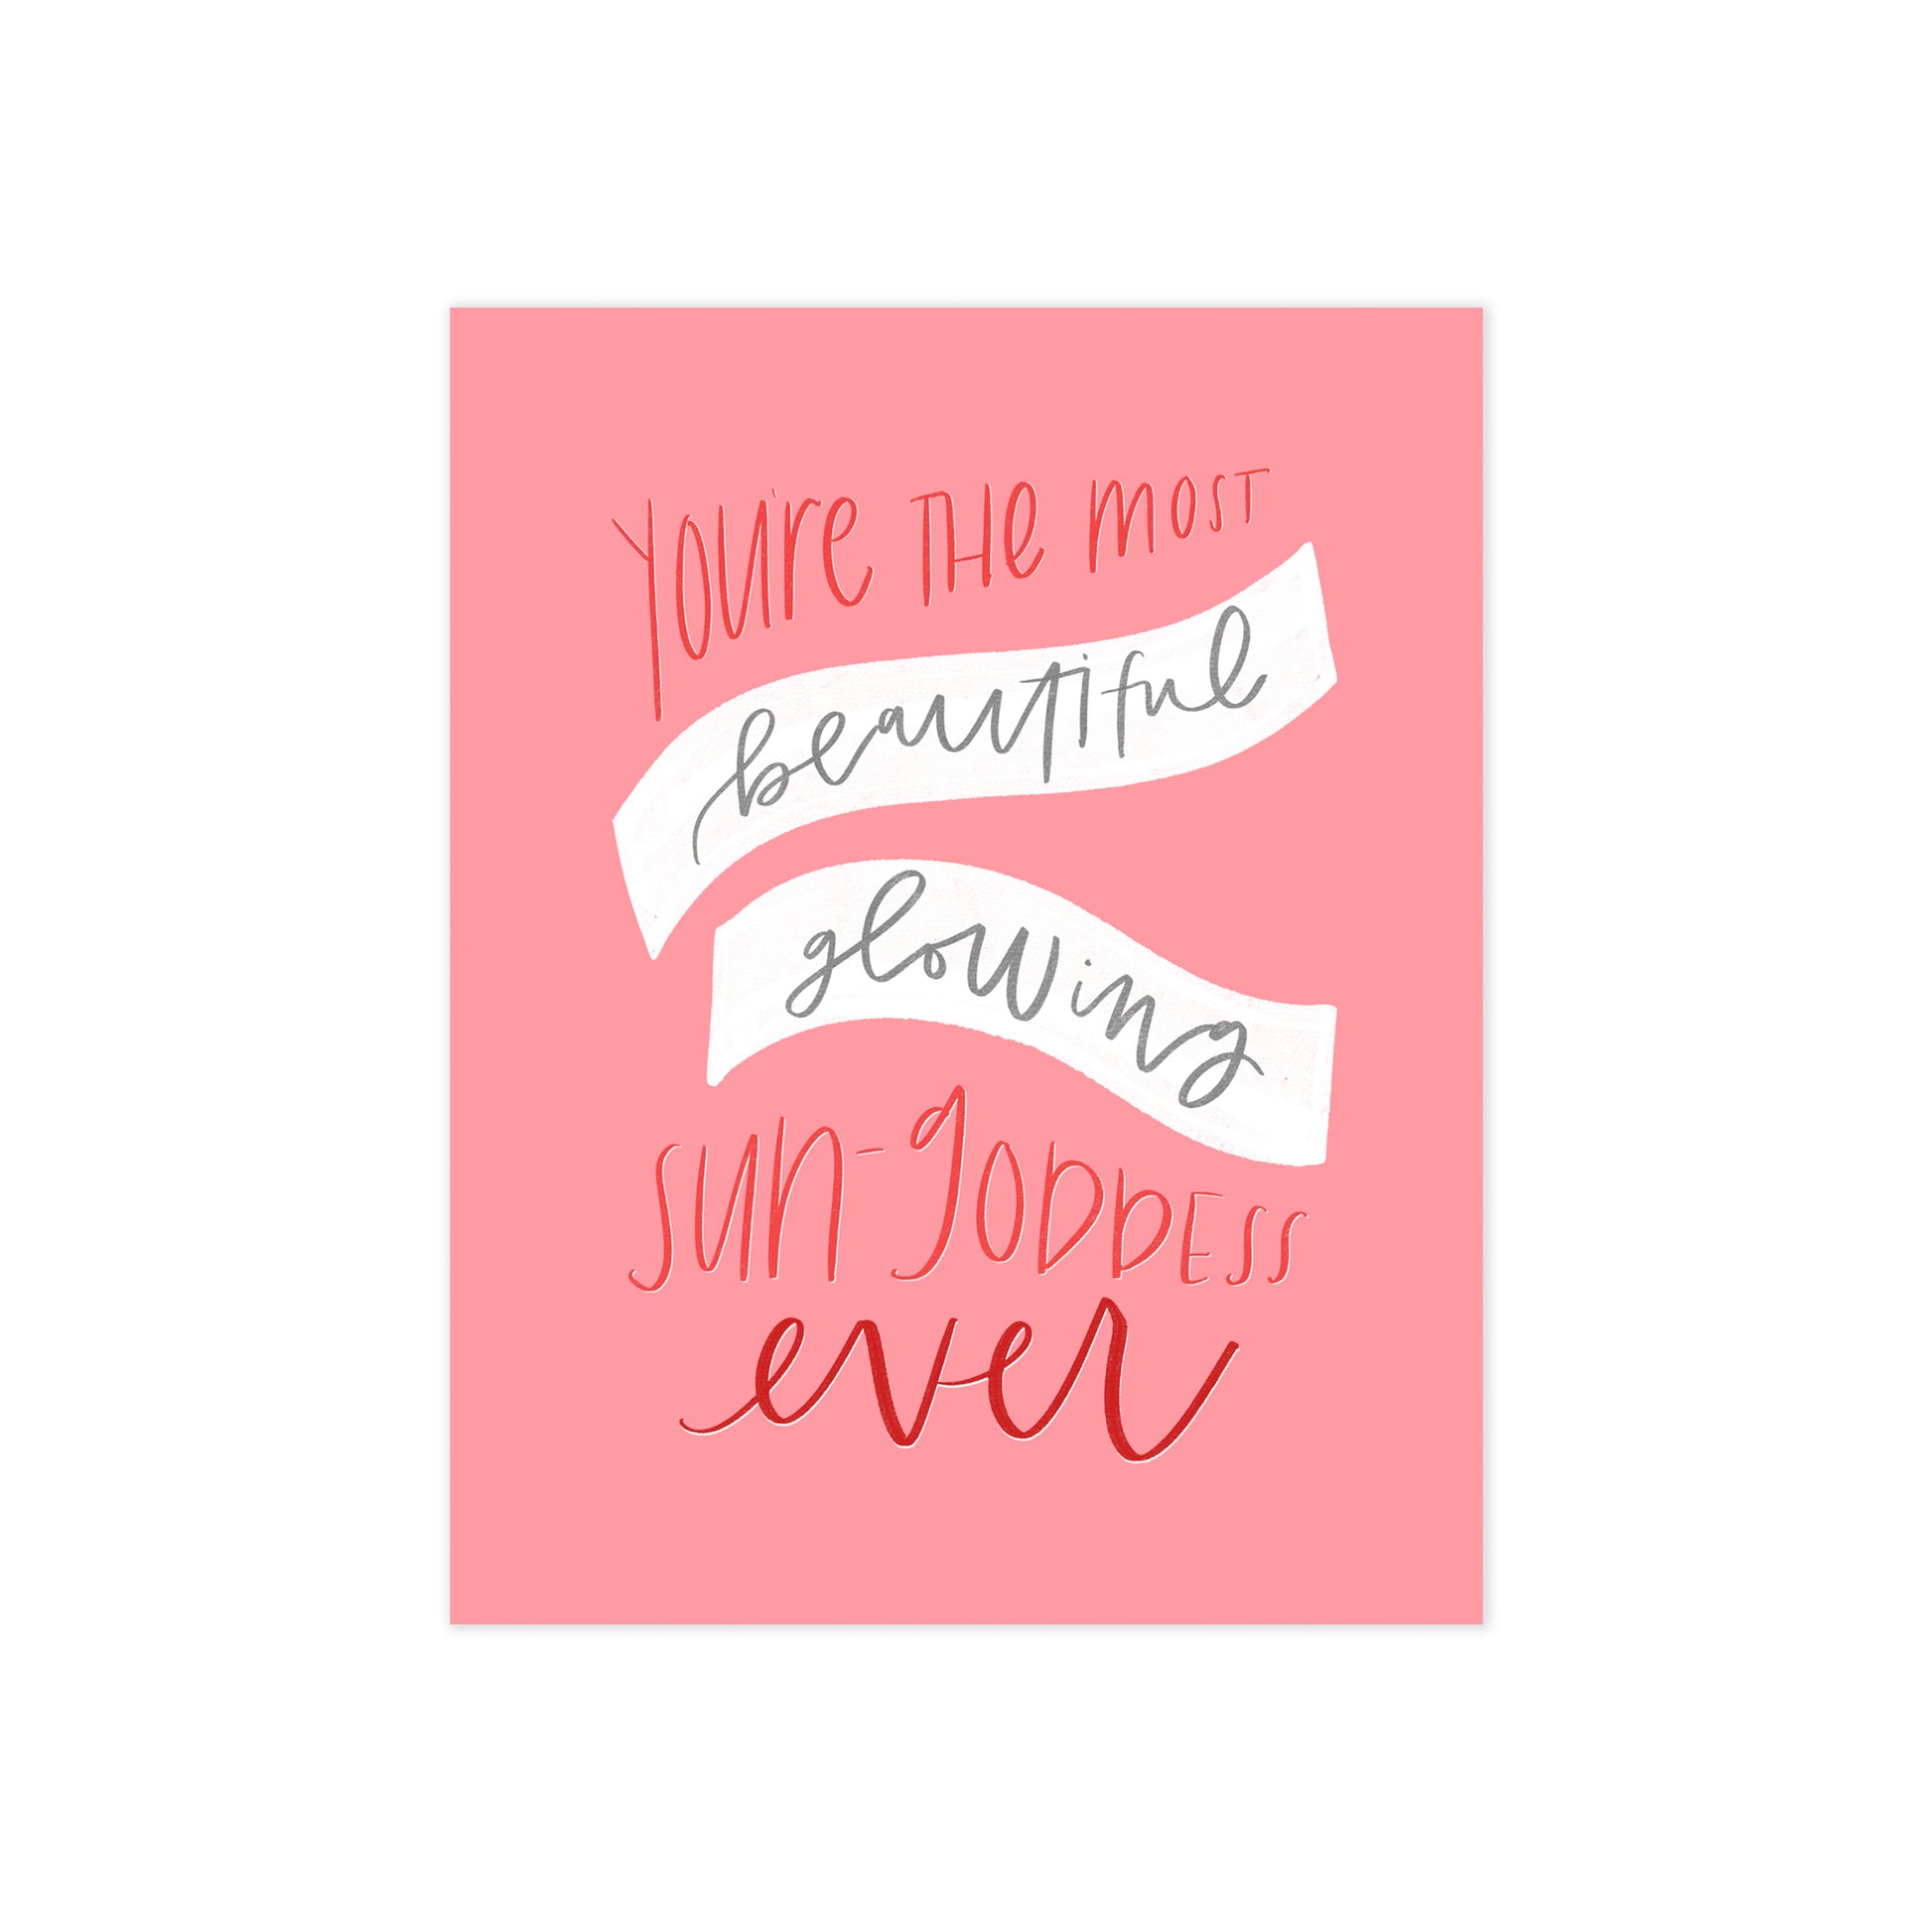 oh joyful day greeting card dark pink background with hand lettering of you're the most beautiful, glowing sun-goddess ever in red lettering with with banners